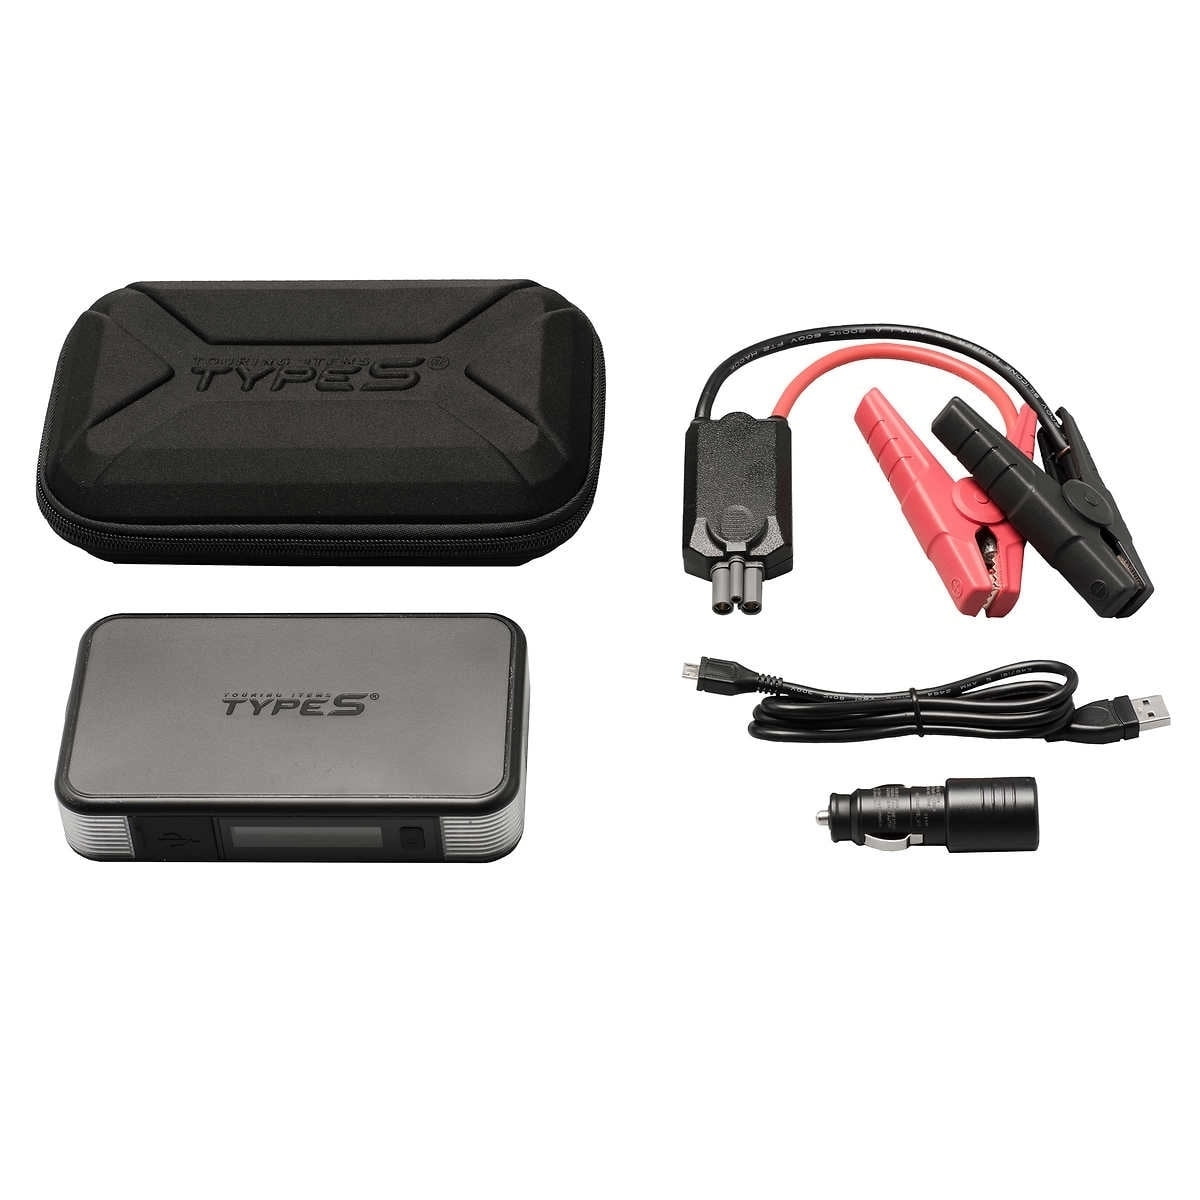 TYPE S Portable Jump Starter & Power Bank with Emergency Multimode